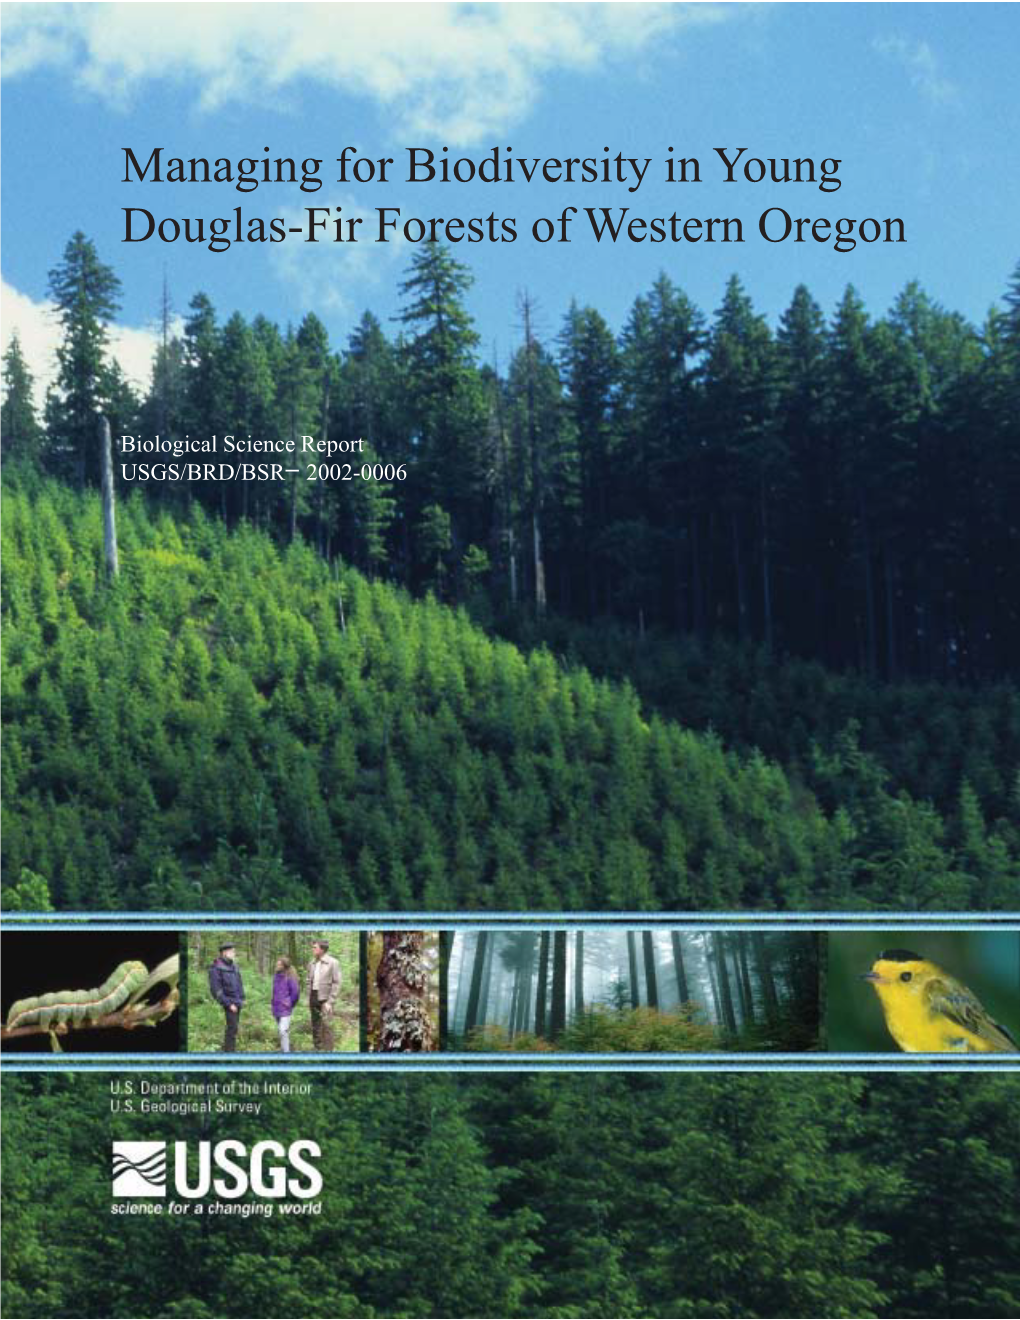 Managing for Biodiversity in Young Douglas-Fir Forests of Western Oregon